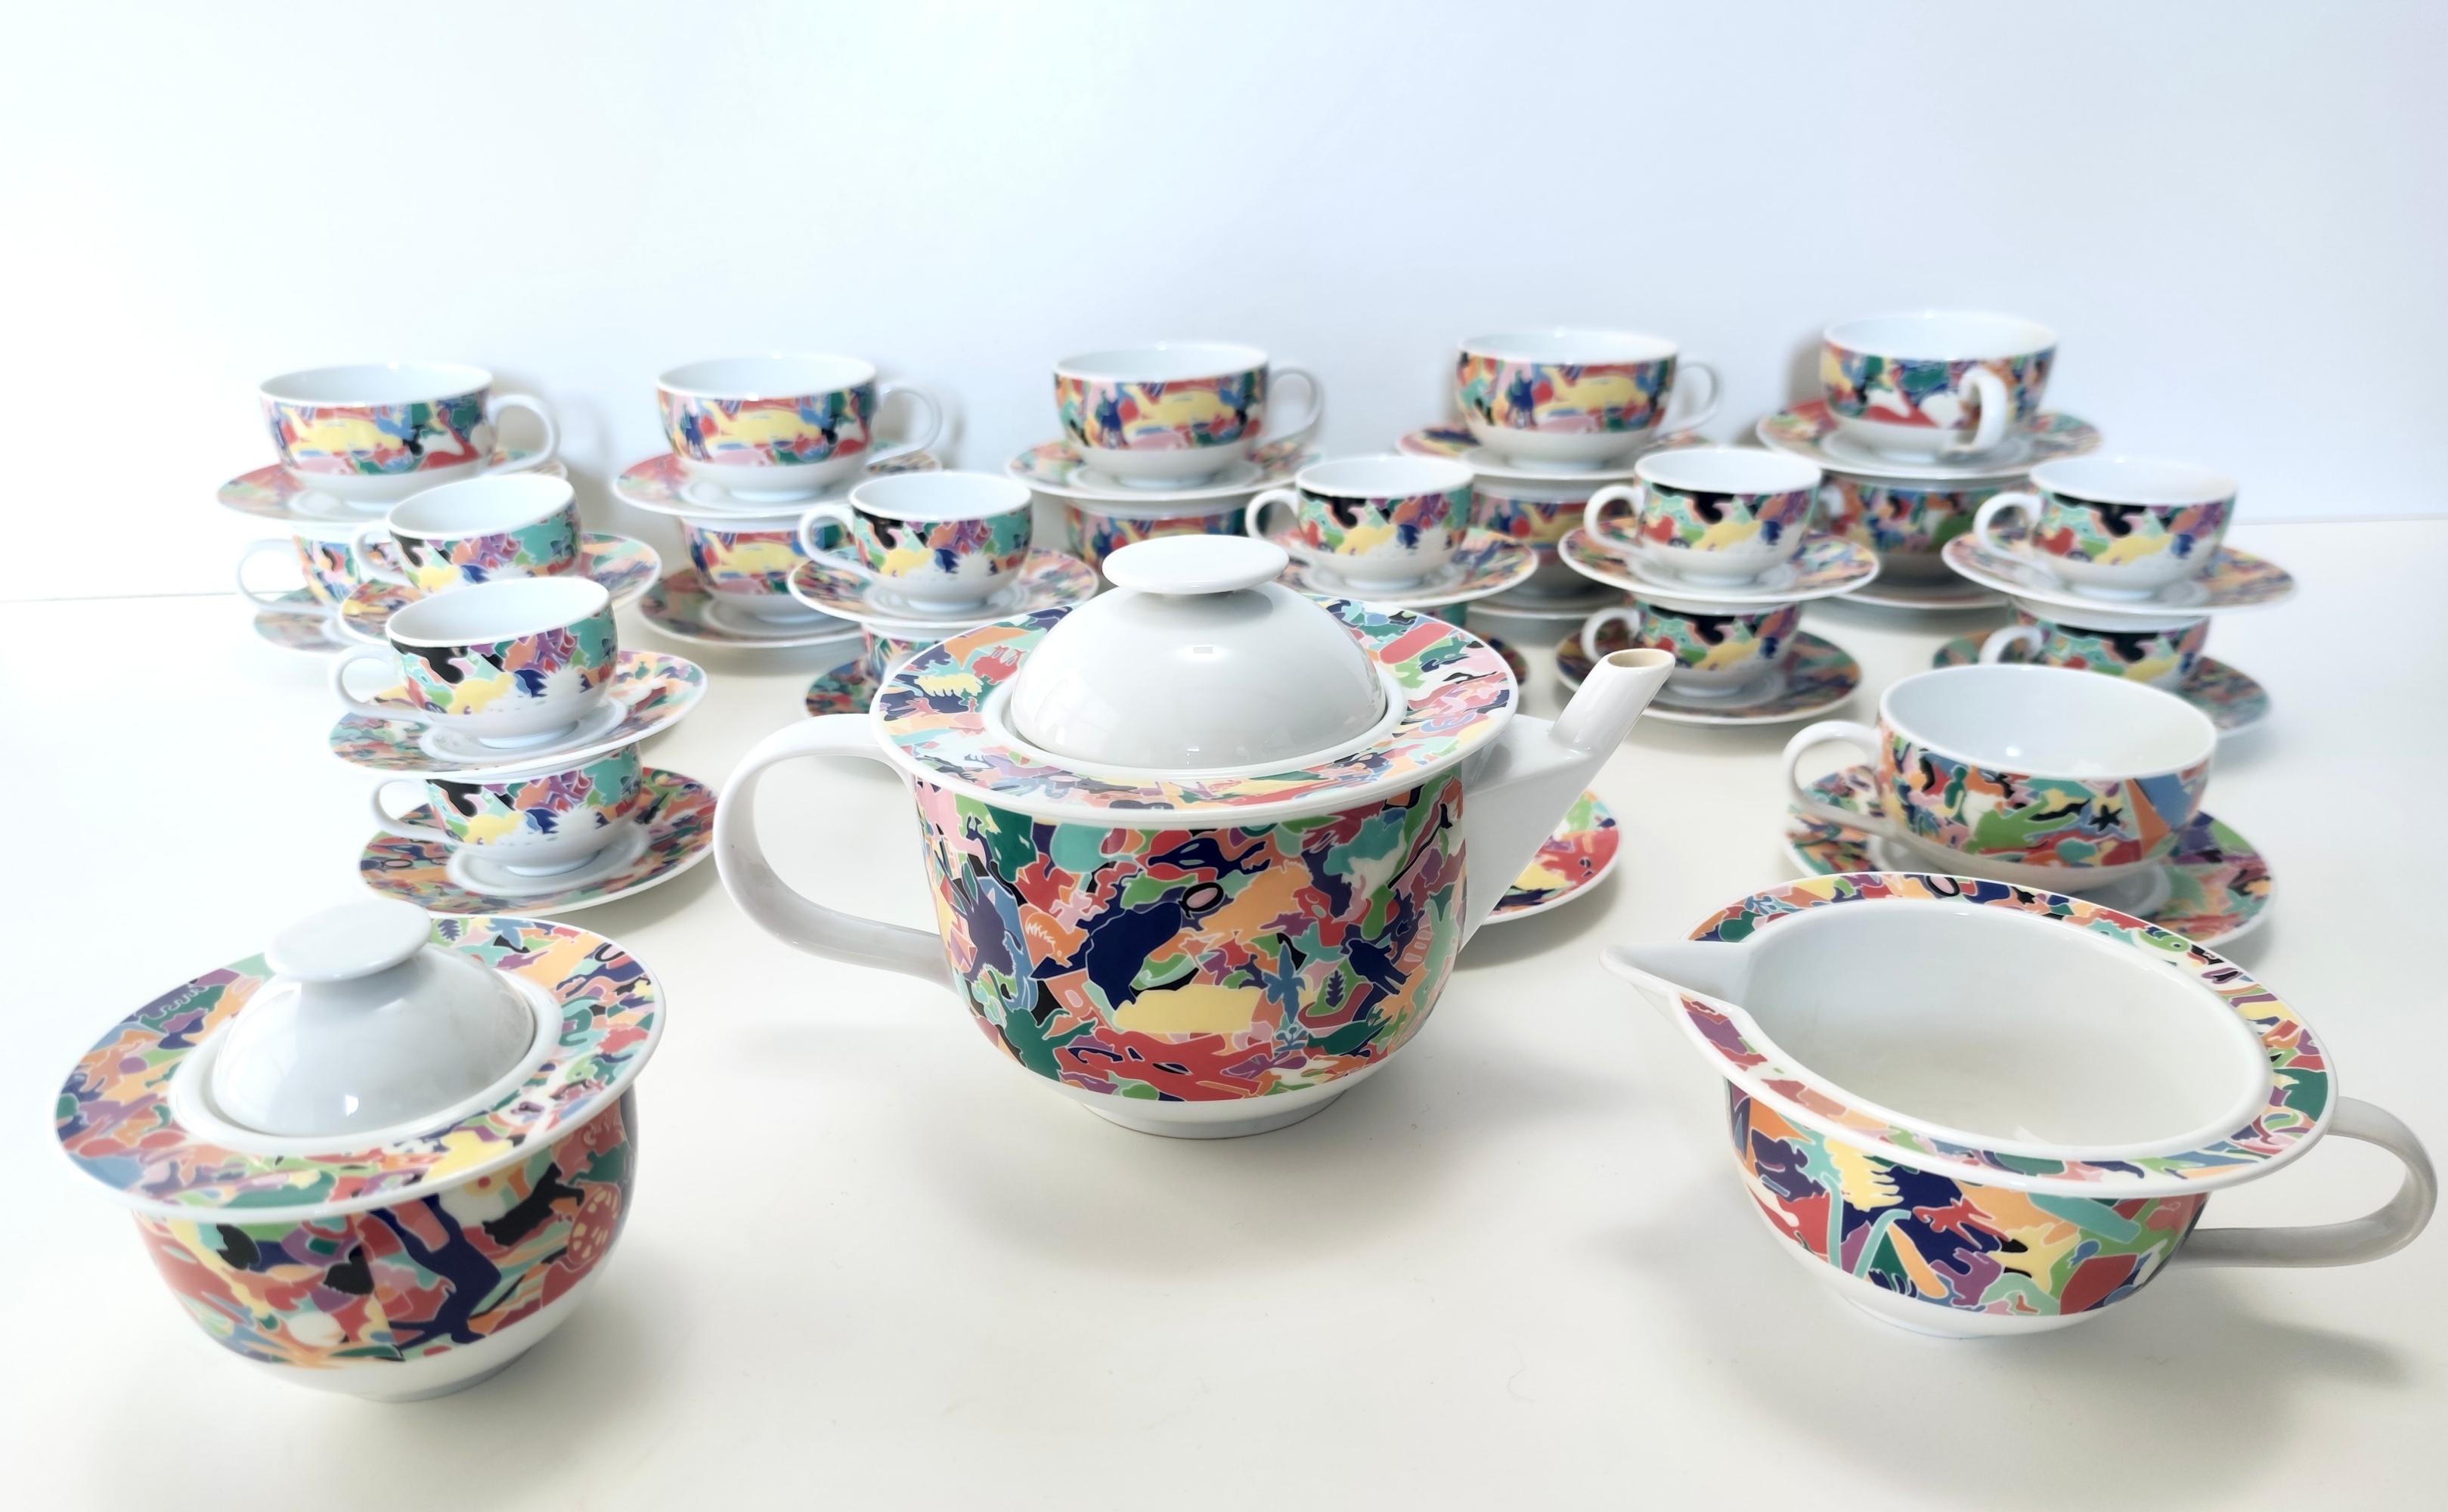 Made in Italy, 1993.
This set was designed by Ettore Sottsass for Alessi. The colorful pattern is also designed by Alighiero Boetti. 
In this set there are 
- 12 coffee cups with 12 plates;
- 11 tea cups with 12 plates (un cup is missing);
-